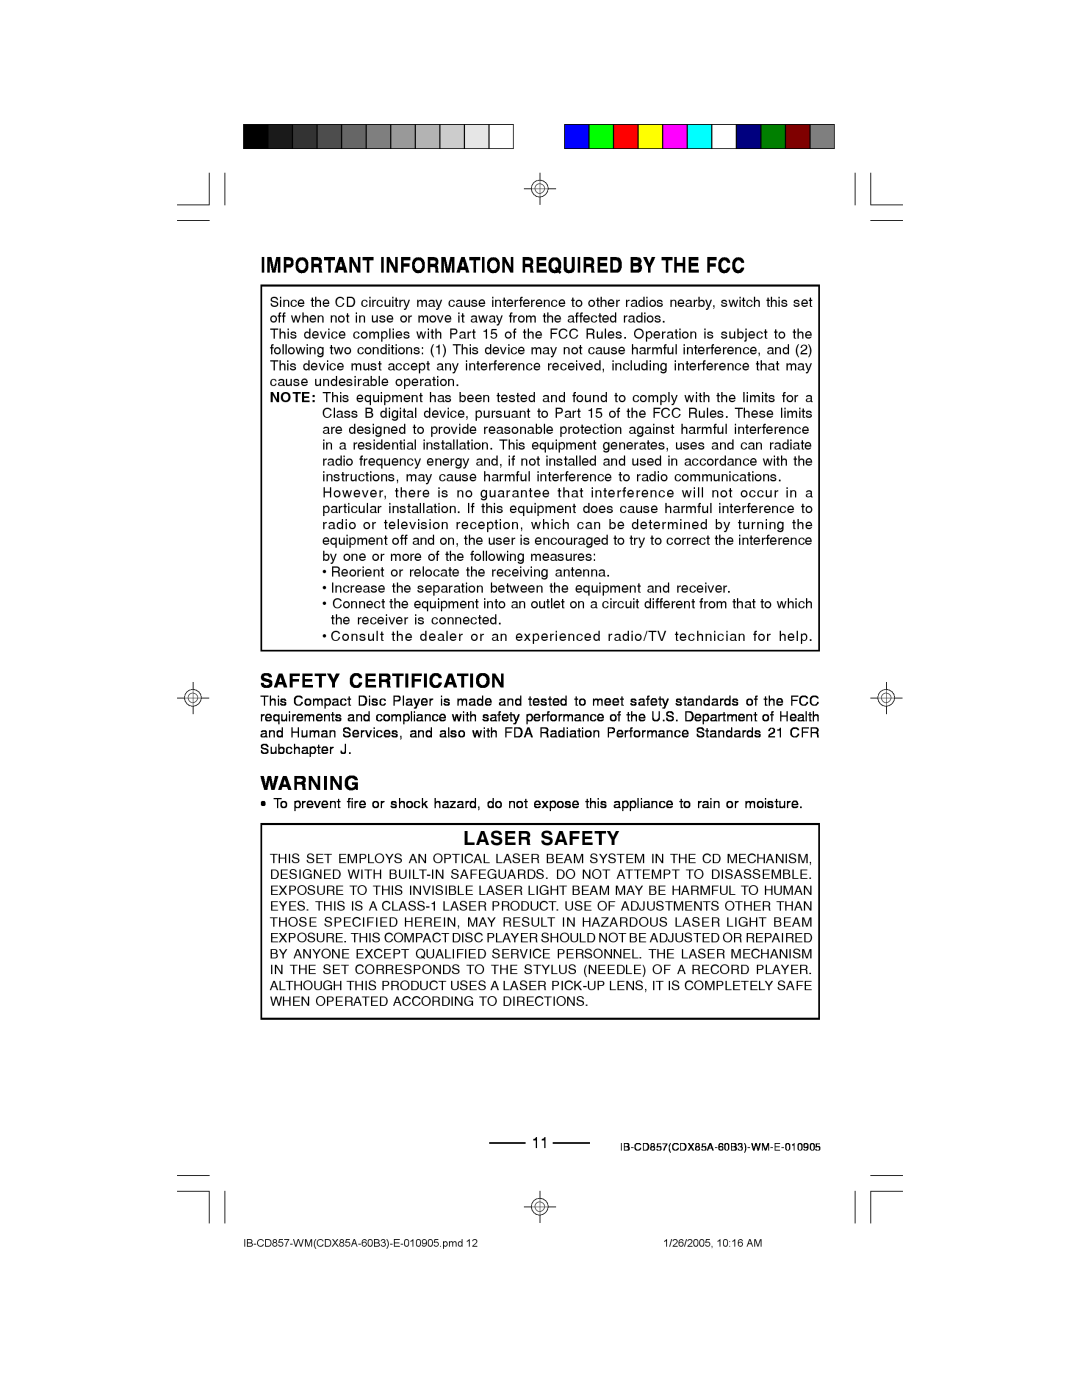 Lenoxx Electronics CD-857 manual Important Information Required By The Fcc, Safety Certification, Laser Safety 